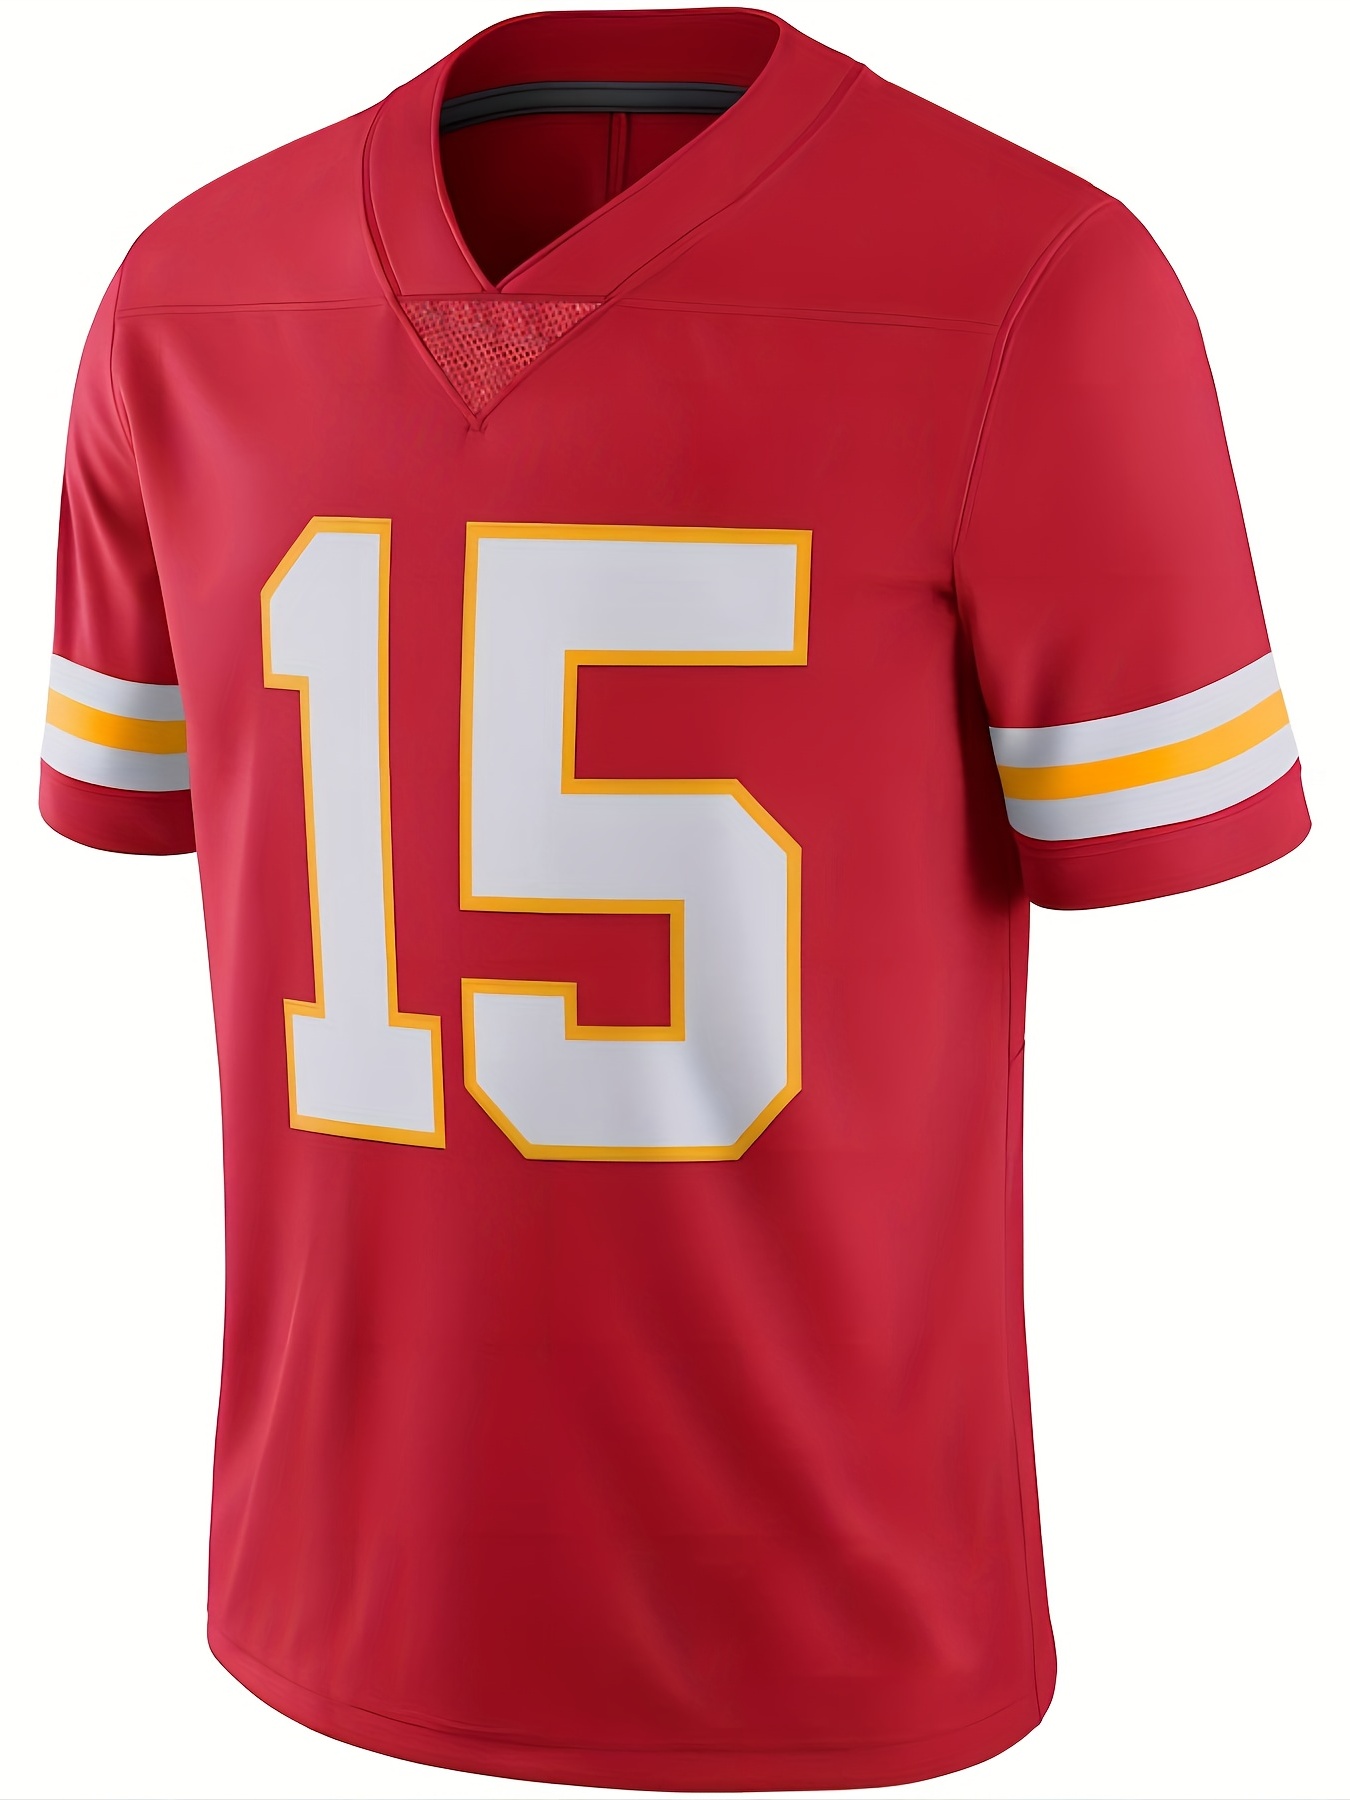 Men's Plus Size Kansas City 15 #Stitched Football Jersey for Men Red,Temu